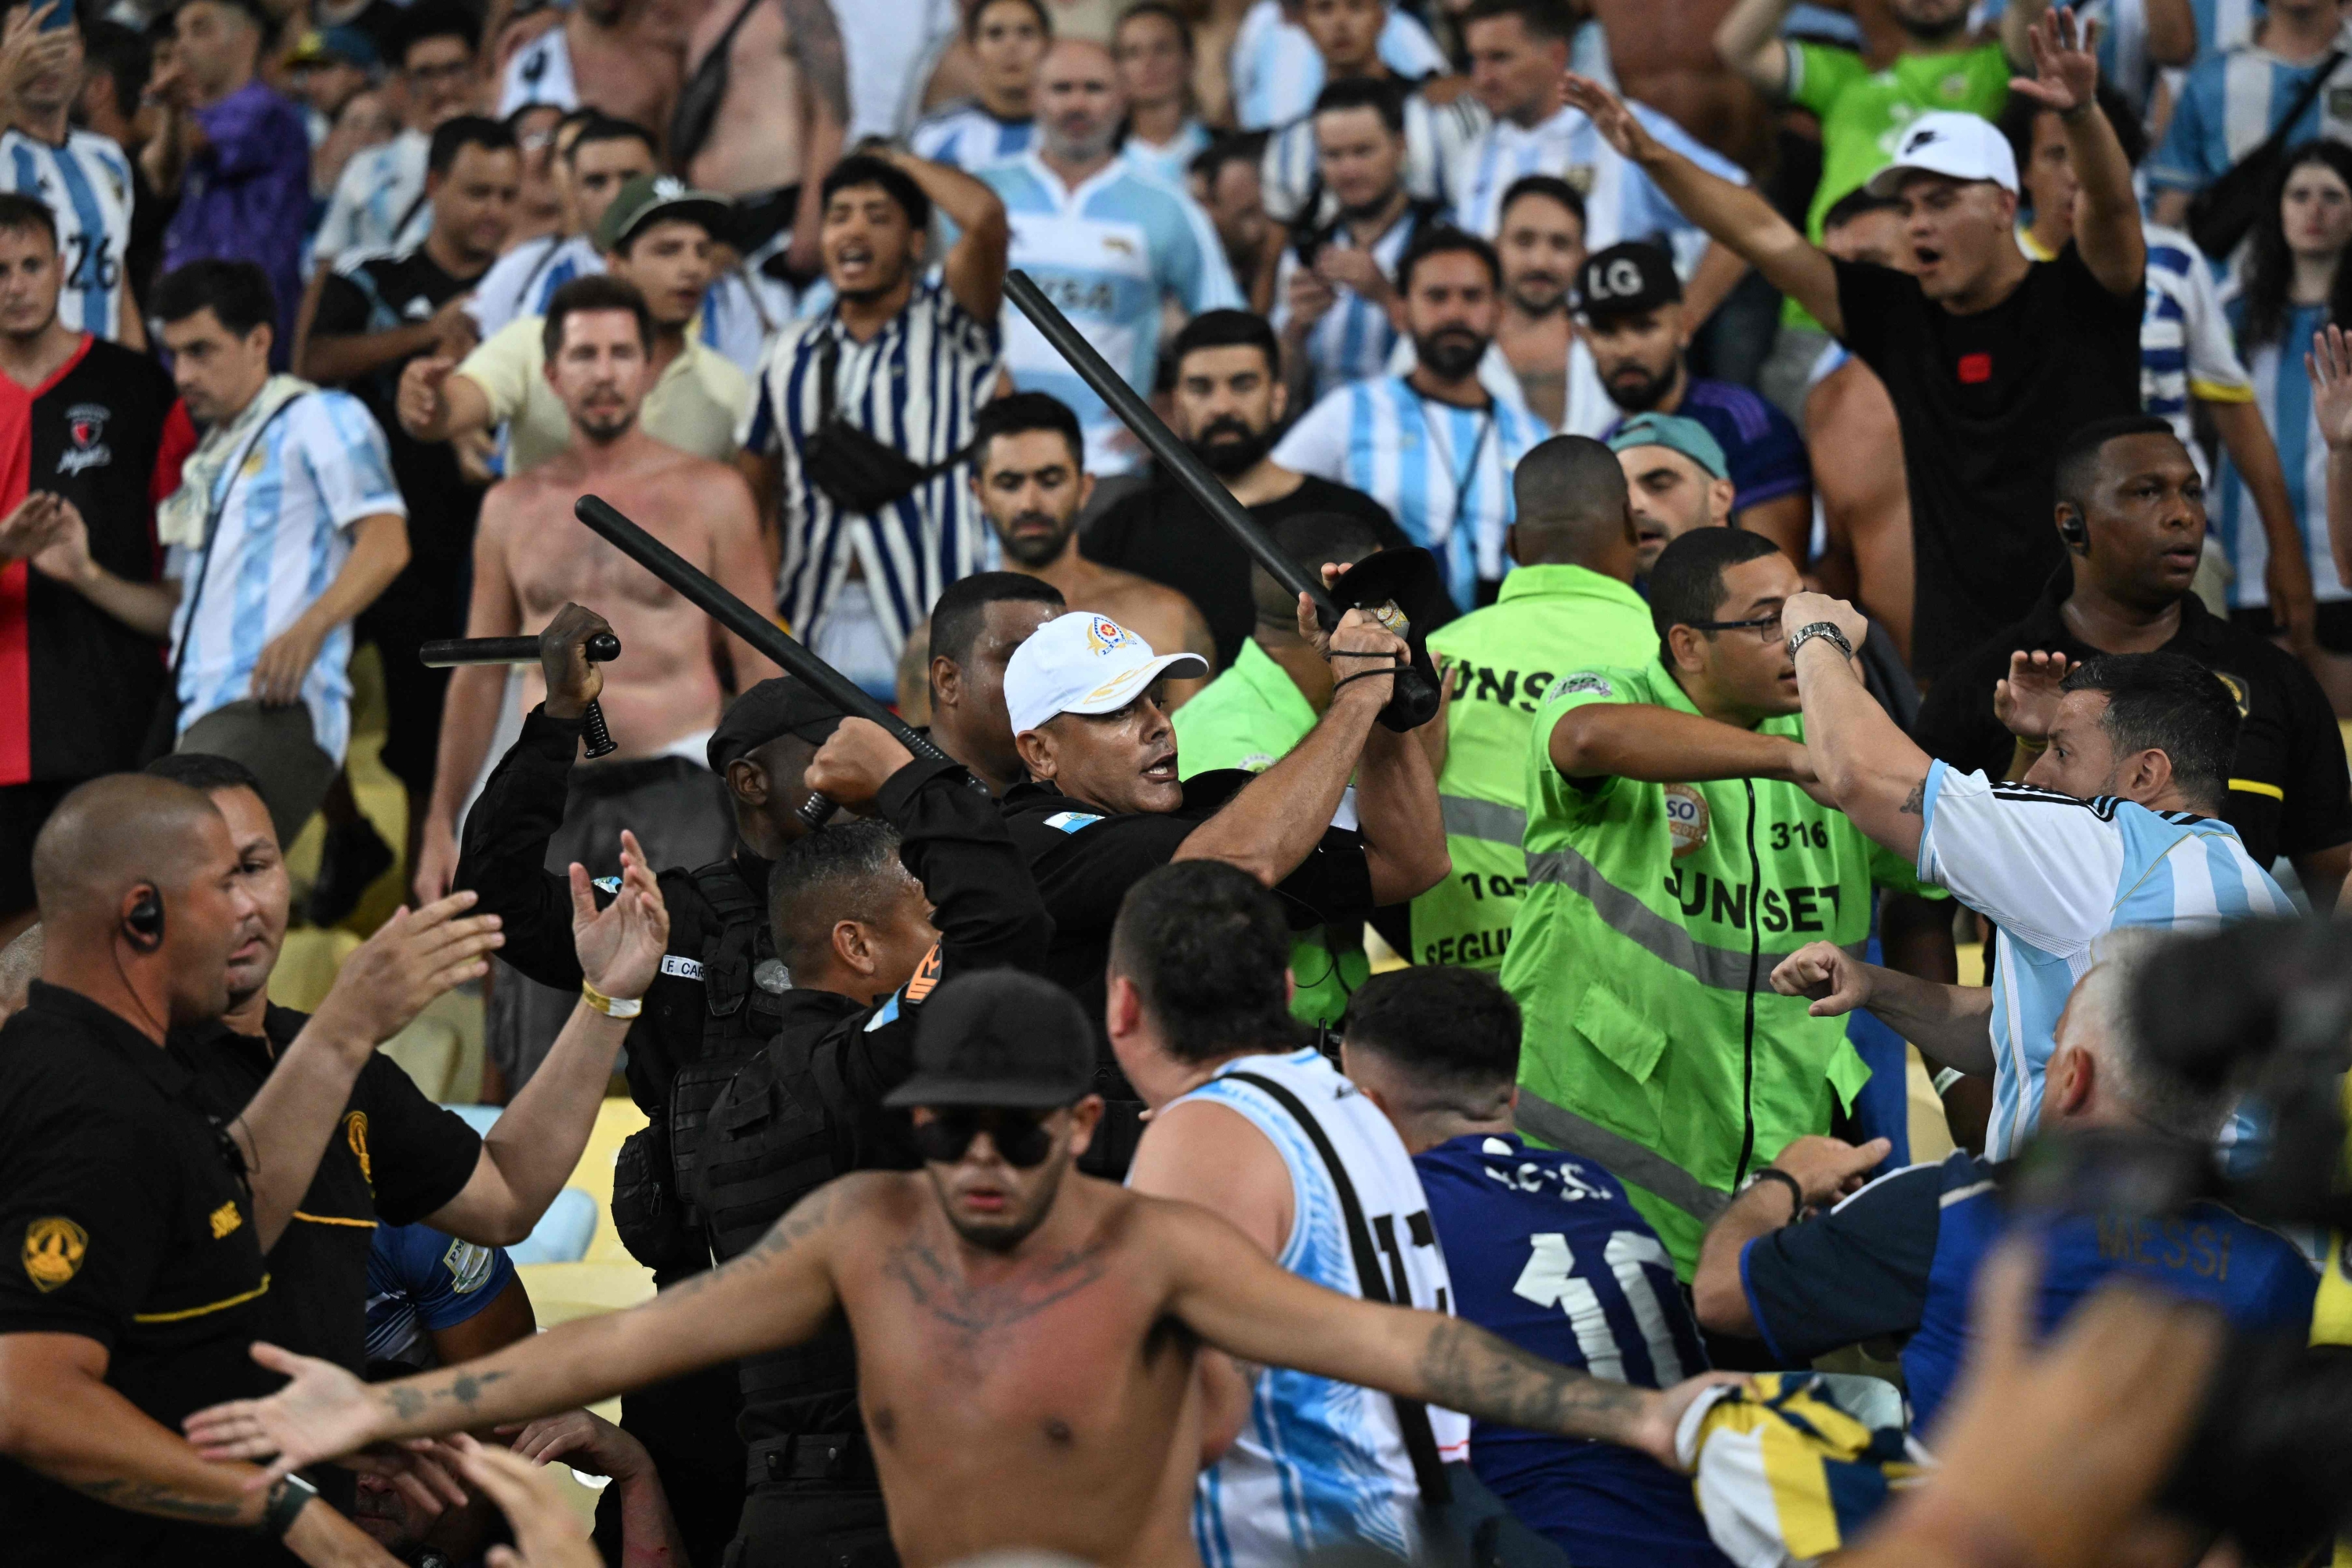 Fans of Argentina clash with Brazilian police before the start of the 2026 FIFA World Cup South American qualification football match between Brazil and Argentina at Maracana Stadium in Rio de Janeiro, Brazil, on November 21, 2023. (Photo by CARL DE SOUZA / AFP)